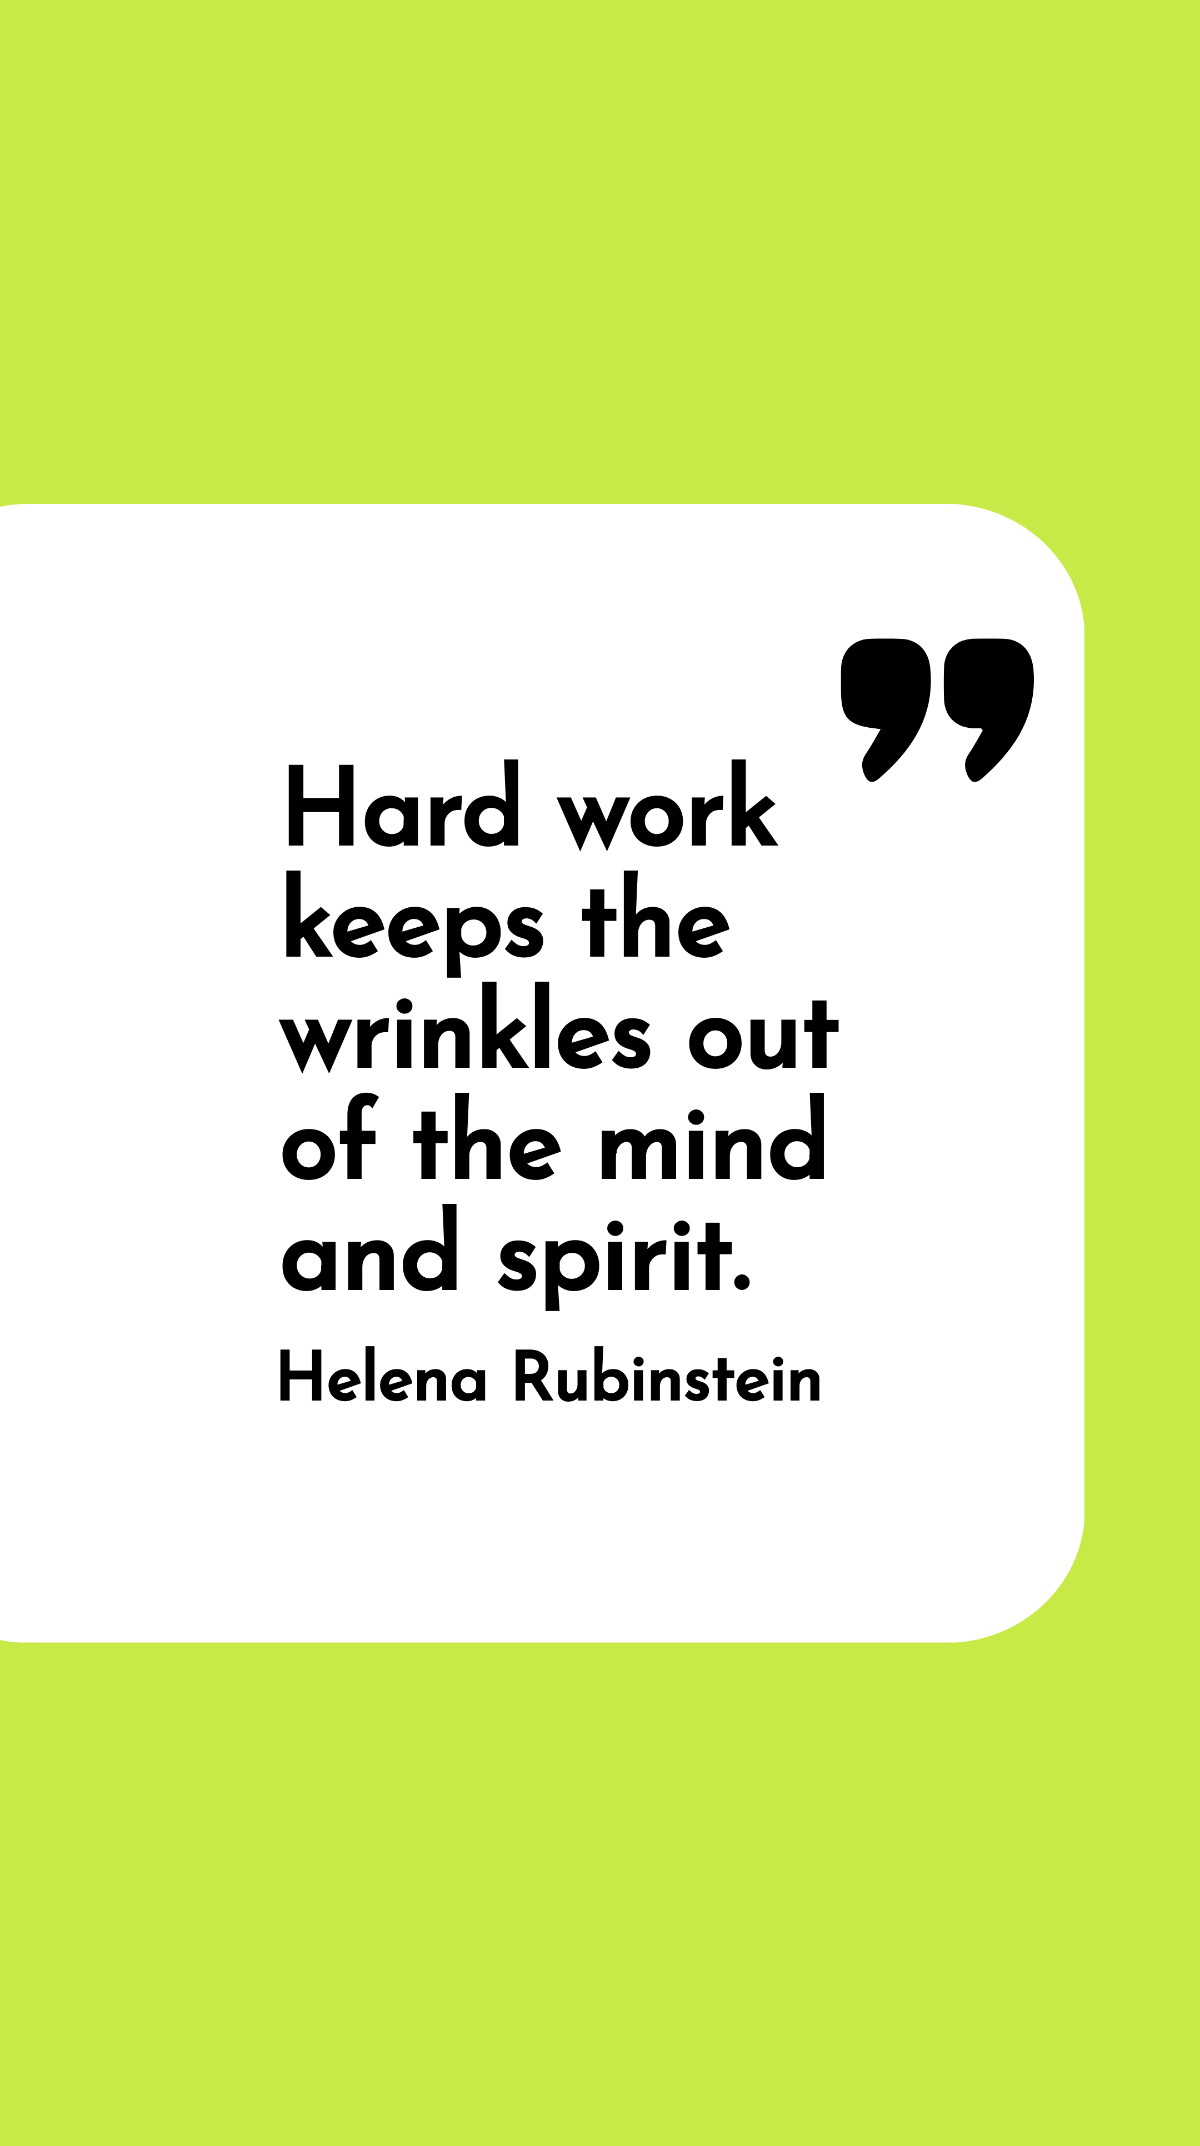 Helena Rubinstein - Hard work keeps the wrinkles out of the mind and spirit.